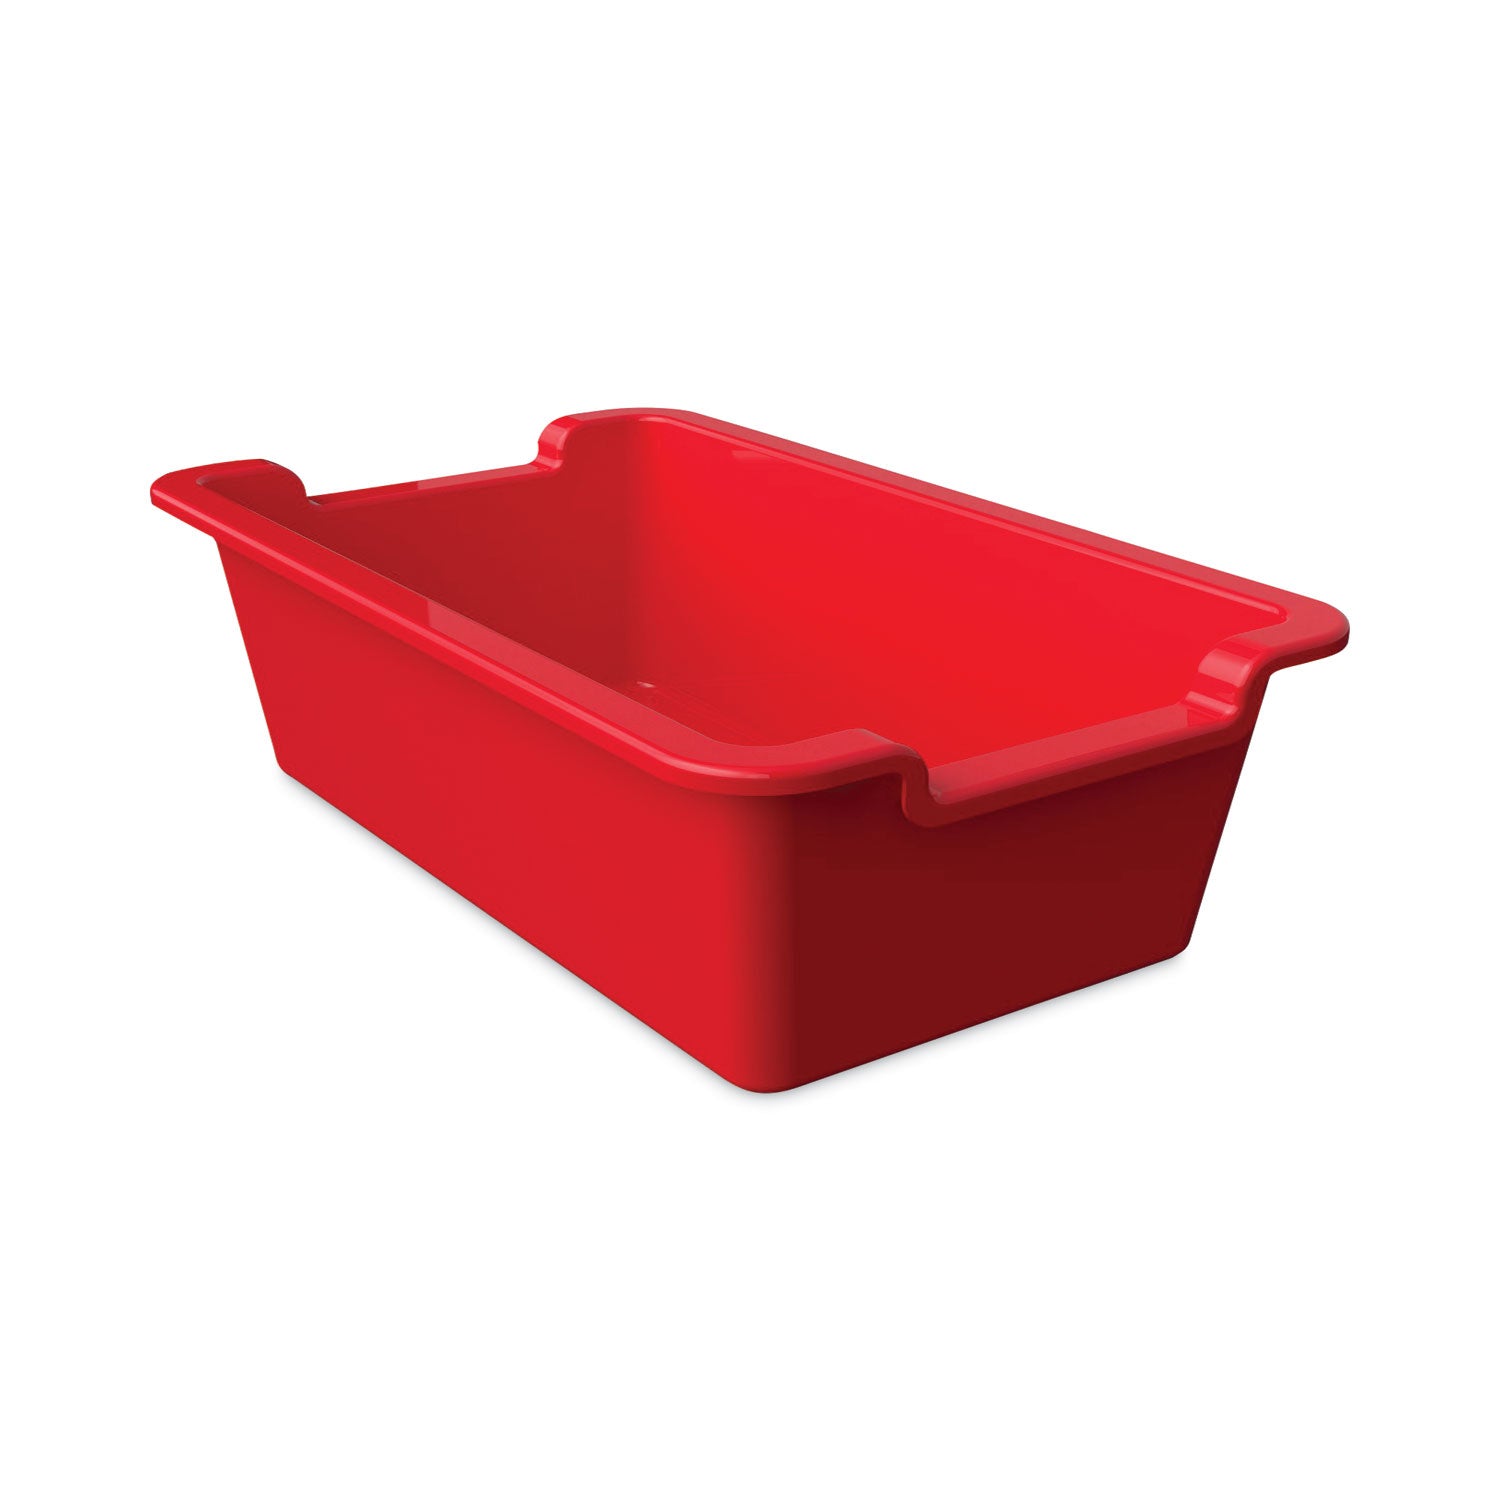 antimicrobial-rectangle-storage-bin-red_def39510red - 1